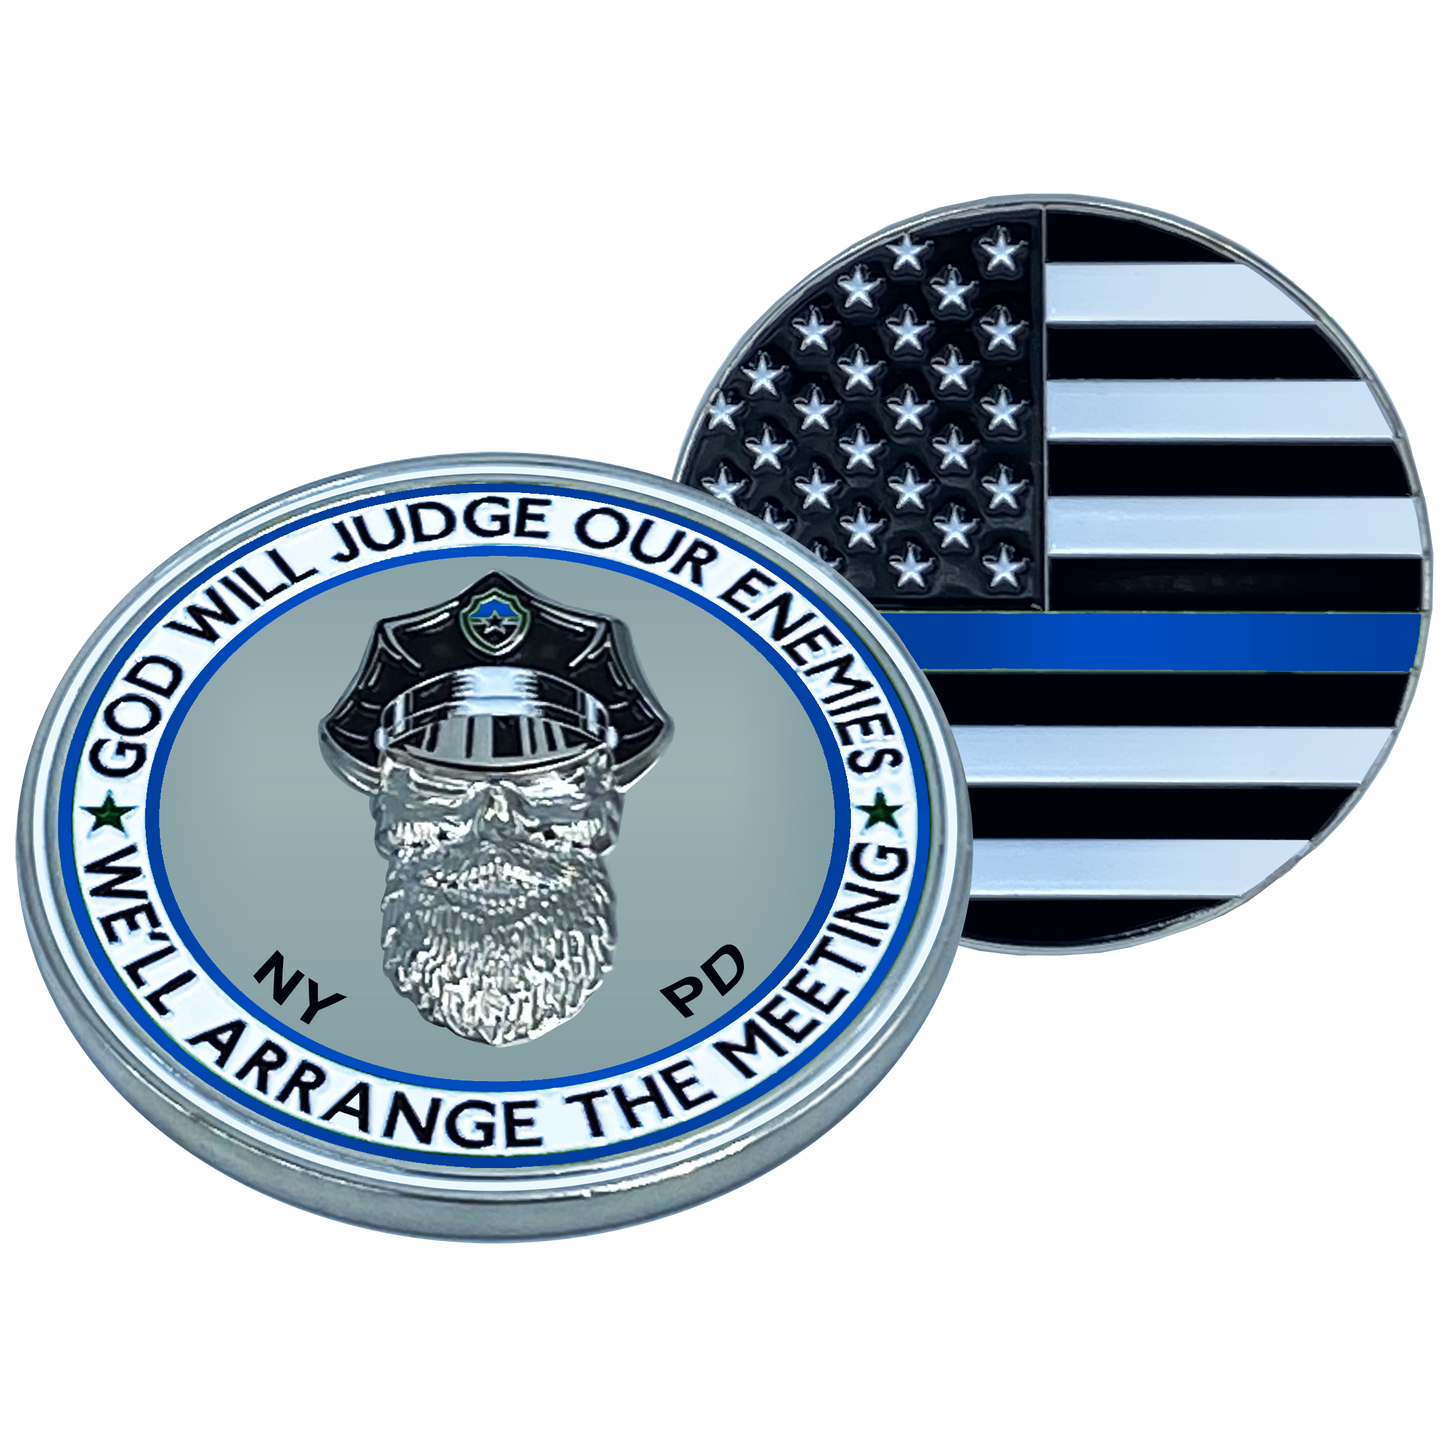 EL1-003 Thin Blue Line NYPD God Will Judge BEARD GANG SKULL Challenge Coin New York City Police Department Back the Blue